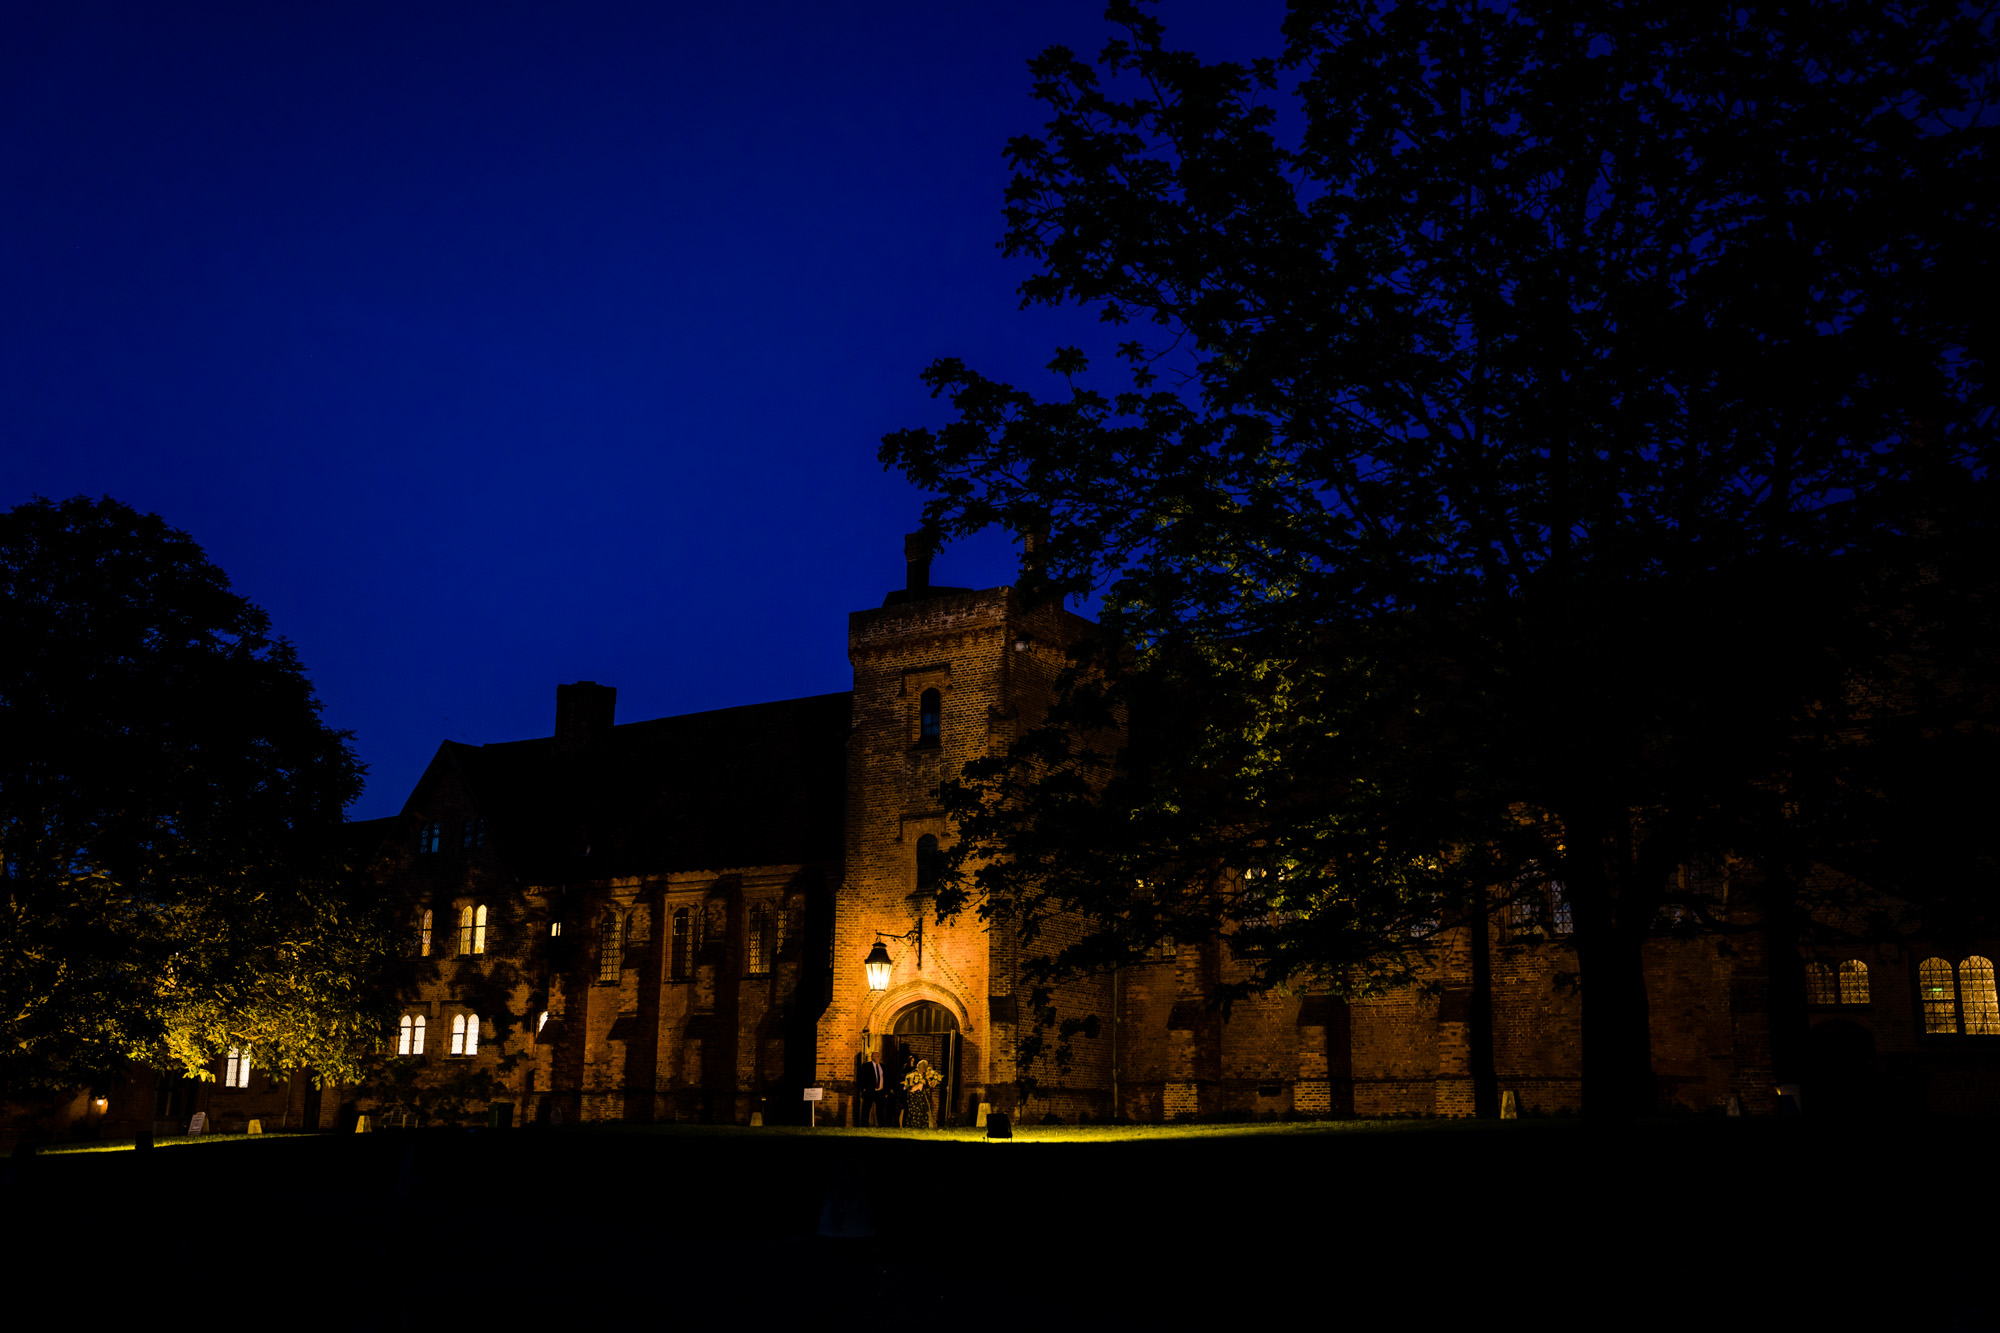 The Old Palace Hatfield house at night